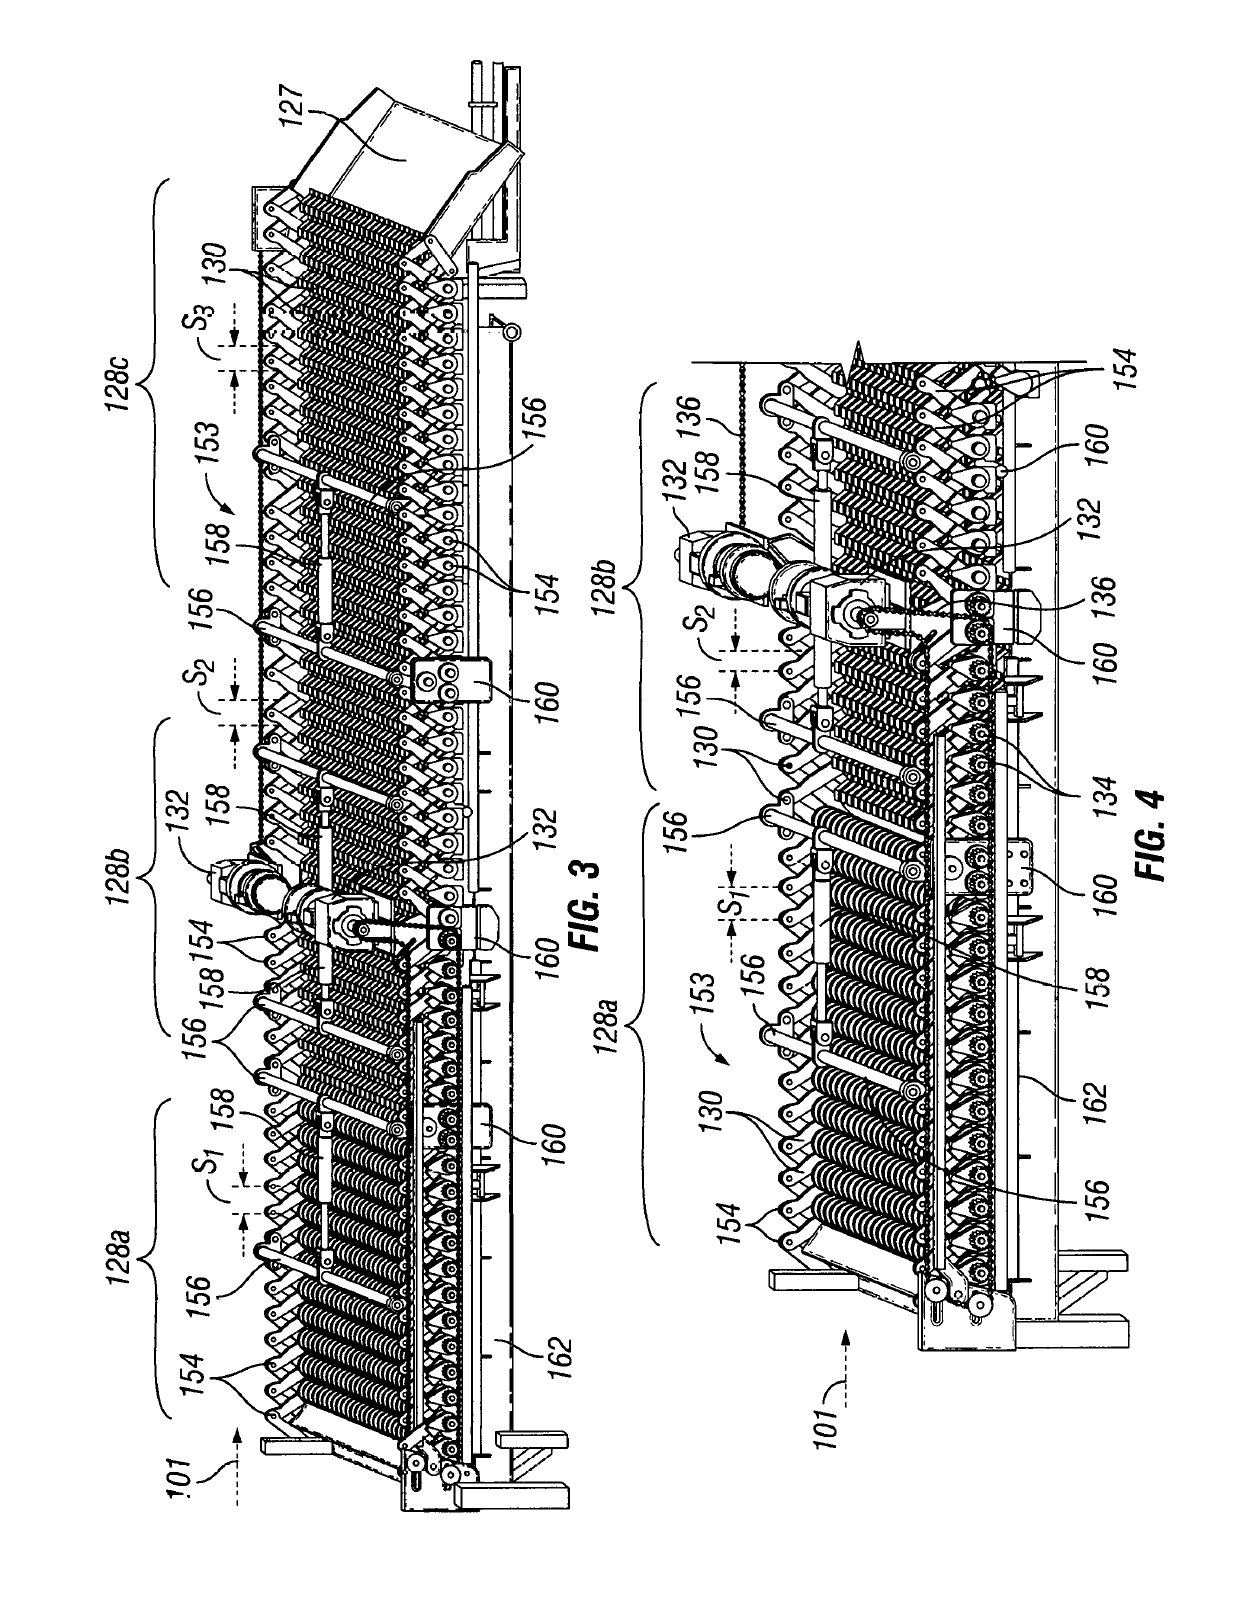 Seed potato cutting system with potato positioning mechanism